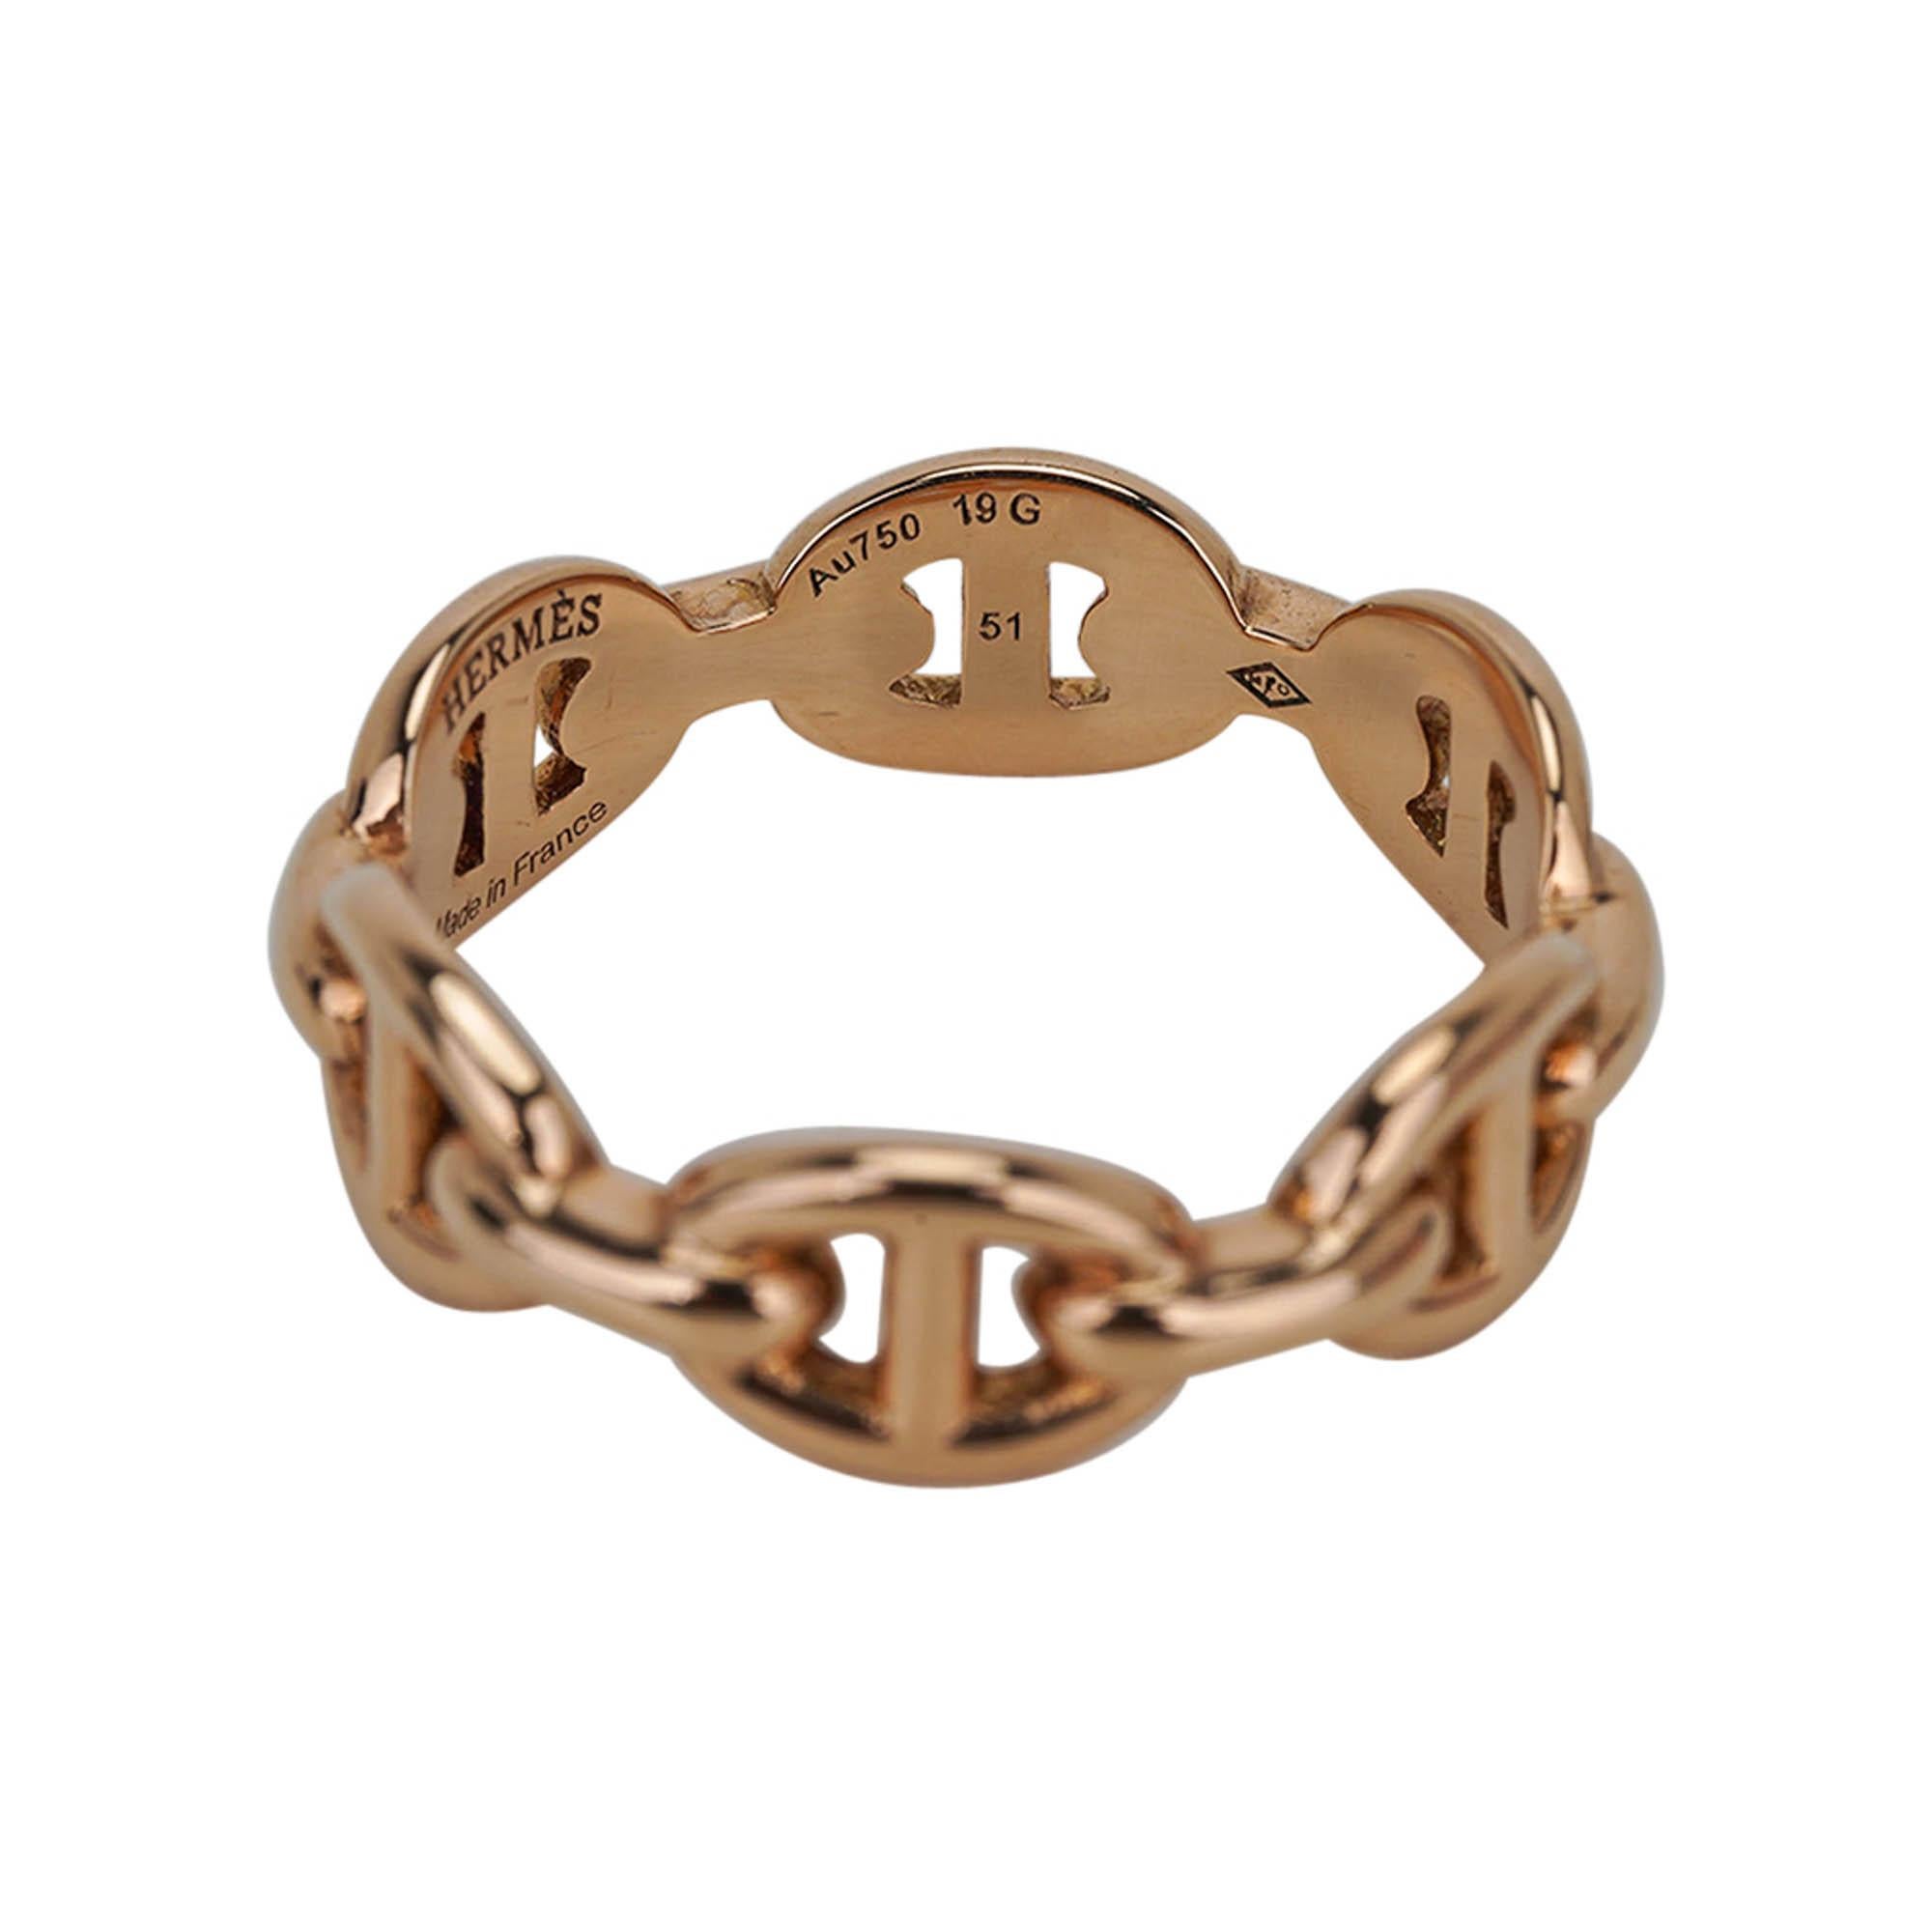 Hermes Chaine d'Ancre Enchainee Ring kleines Modell 18k Rose Gold 51 im Angebot 2